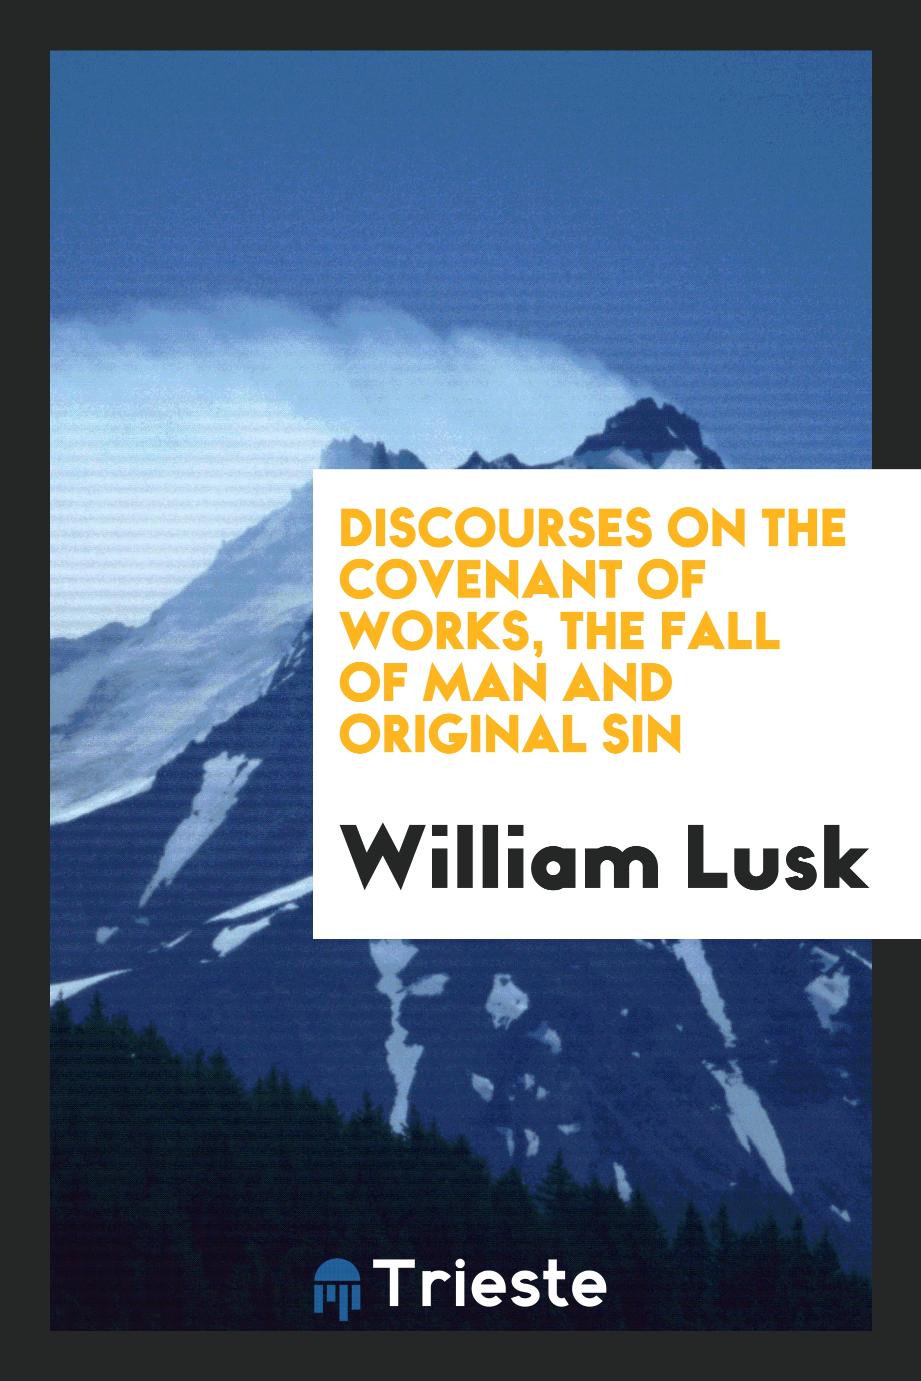 William Lusk - Discourses on the Covenant of Works, the Fall of Man and Original Sin